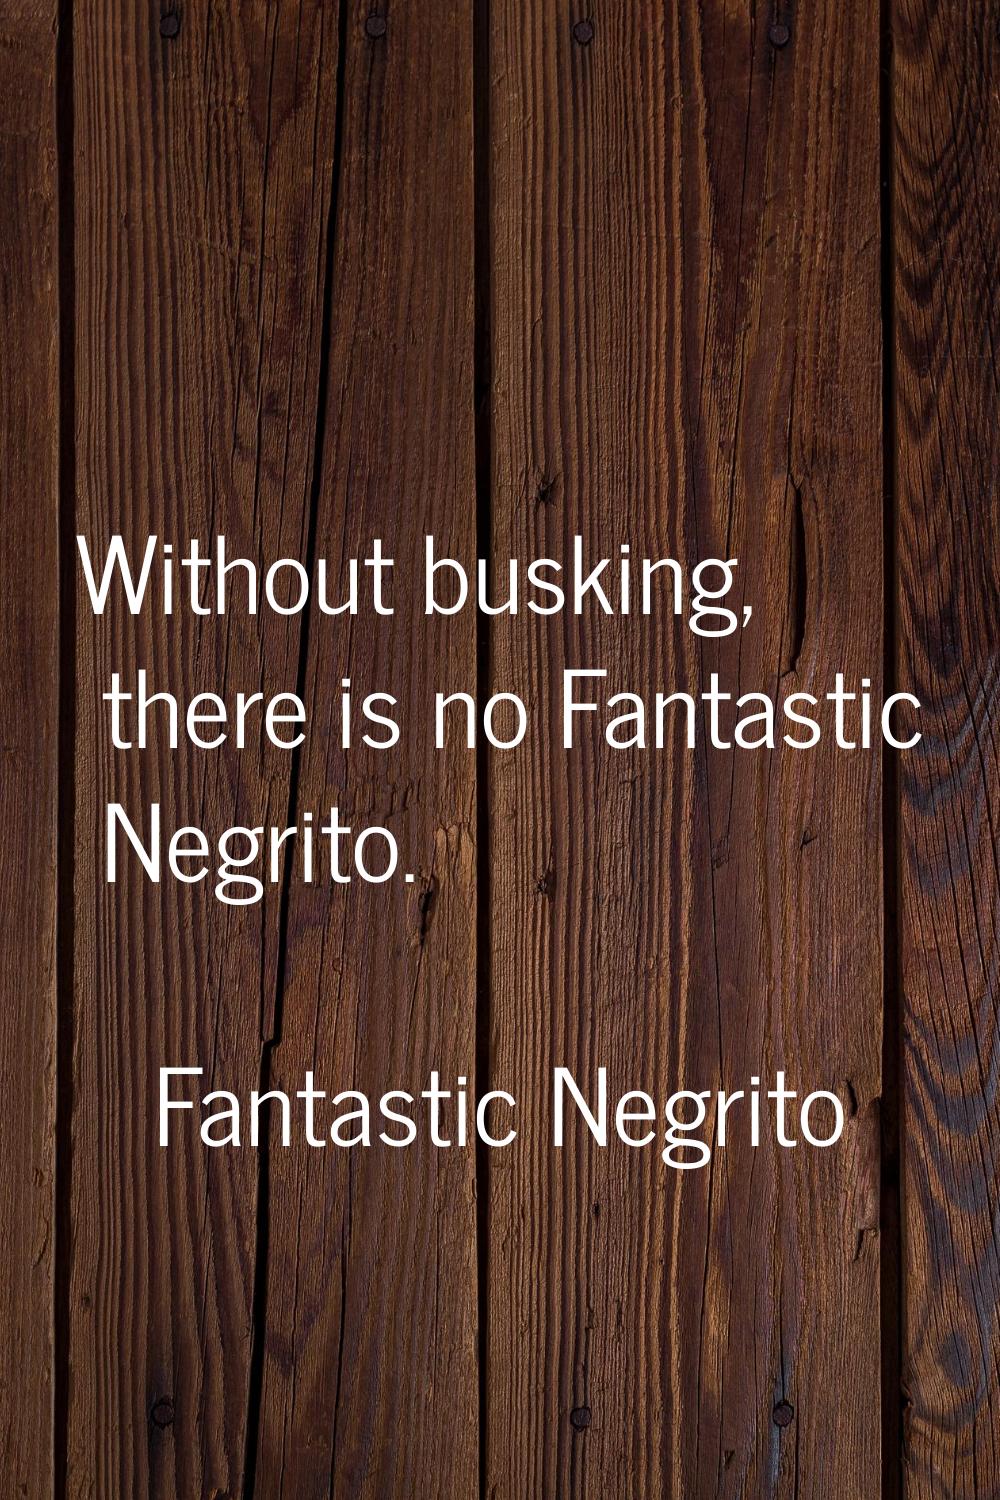 Without busking, there is no Fantastic Negrito.